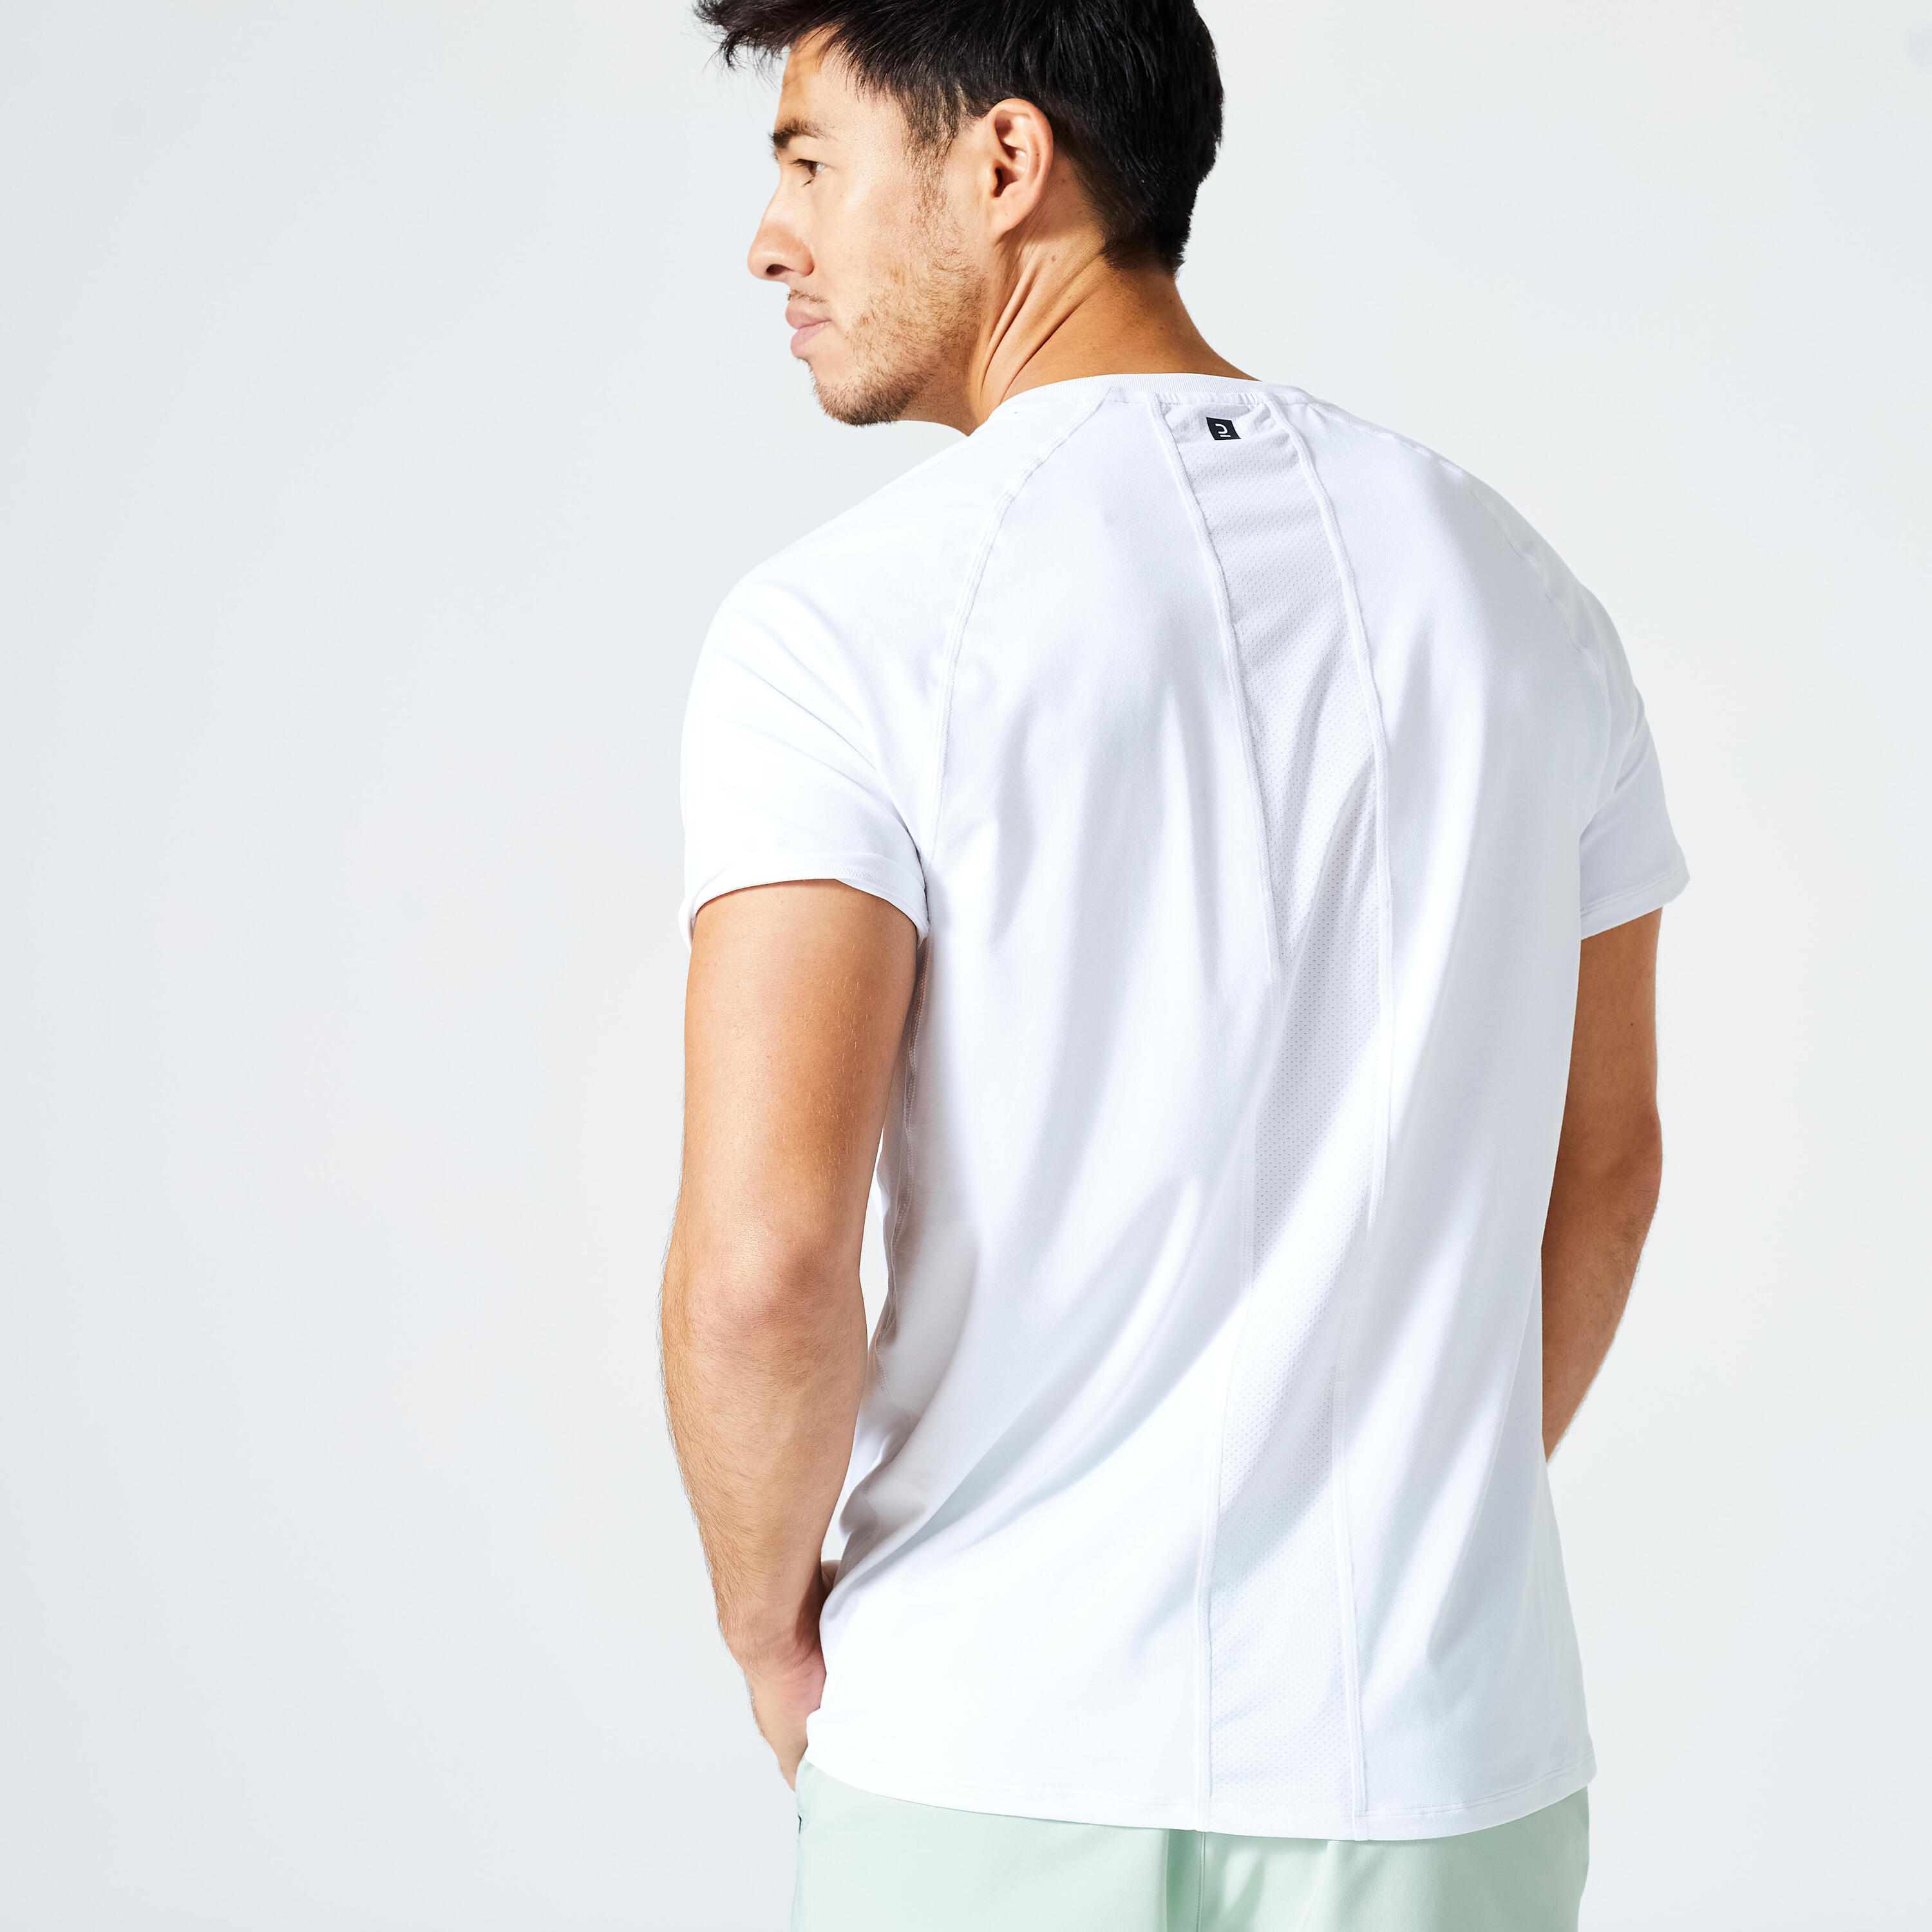 Men's Crew Neck Breathable Essential Fitness T-Shirt - White 3/4